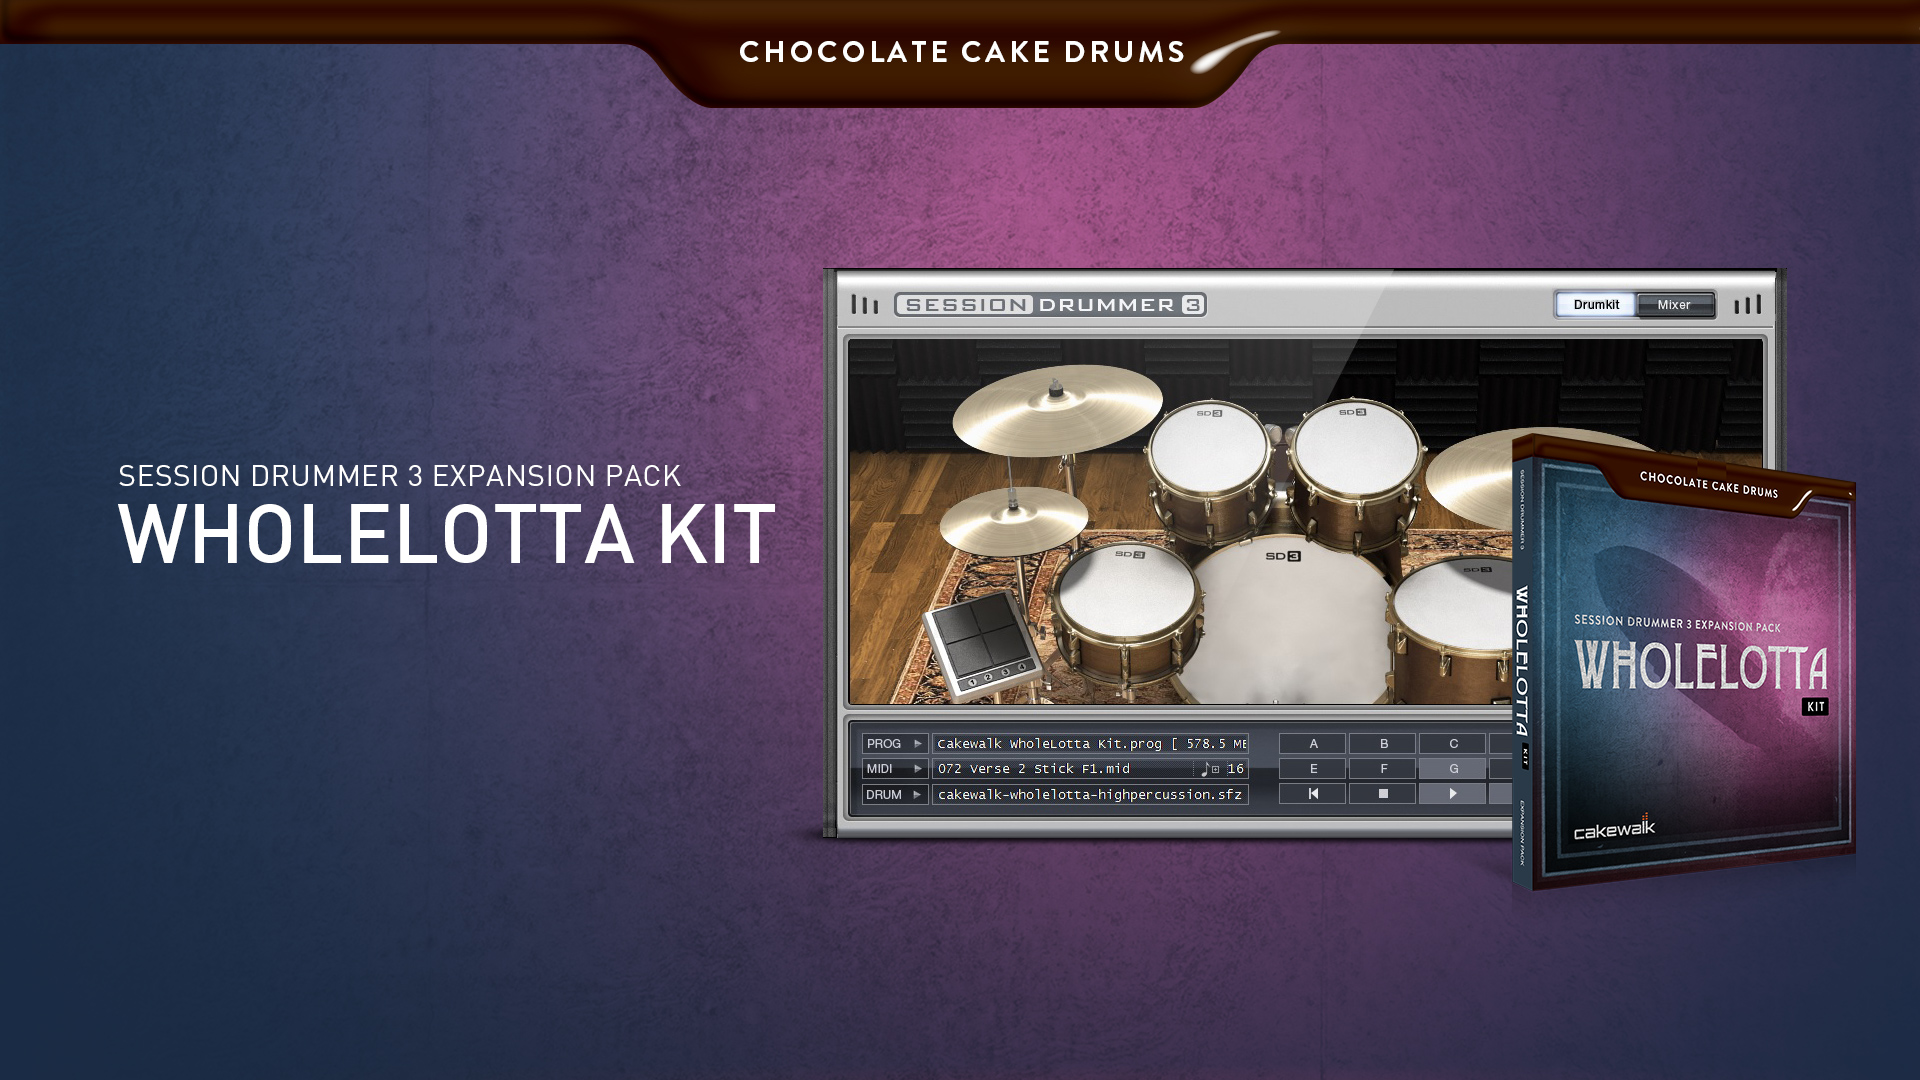 Chocolate Cake Drums: WholeLotta Kit - For Session Drummer 3 Featured Screenshot #1